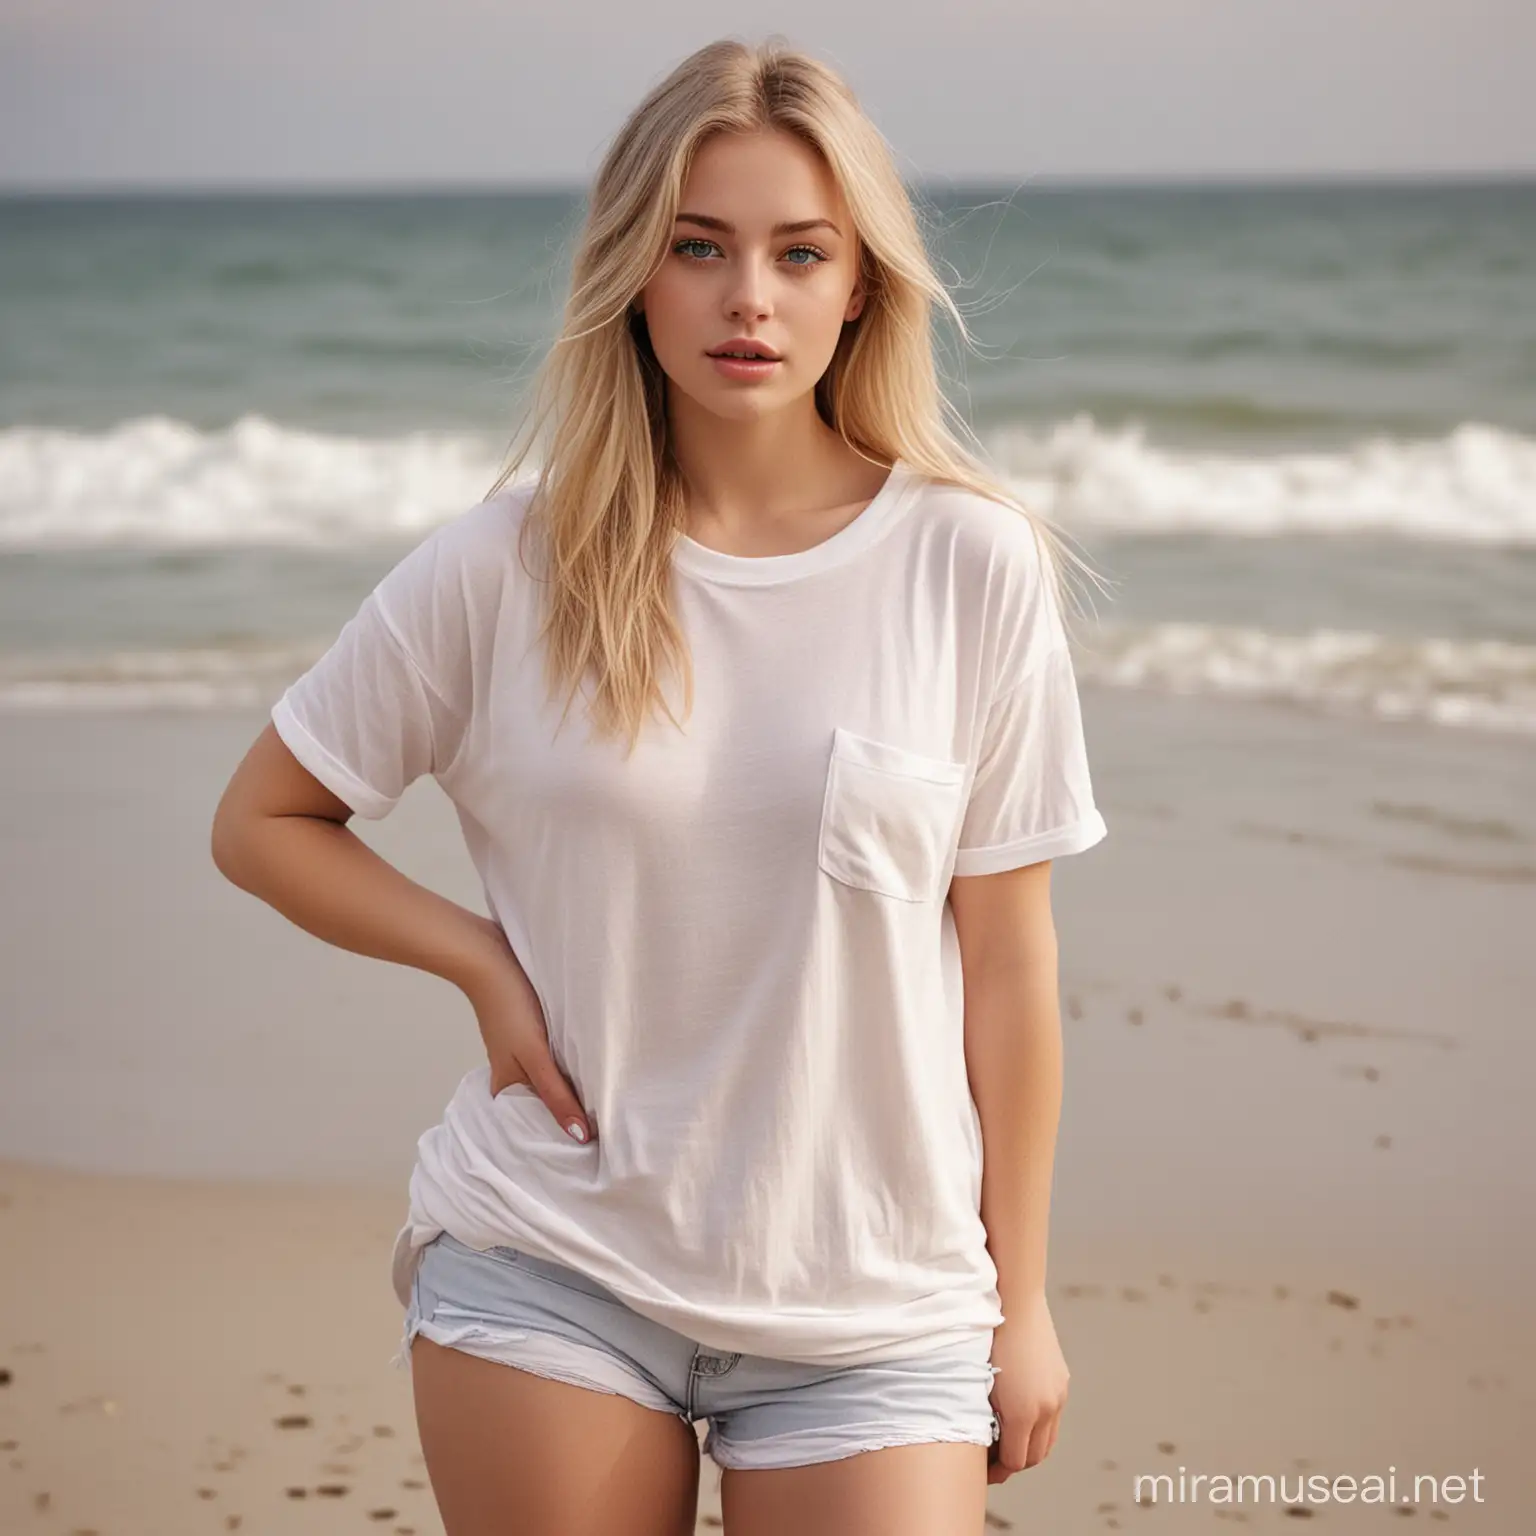 Beautiful caucasian Nordic woman aged 21, very attractive, round baby face, highly detailed round blue eyes, curvy figured, with long legs with one small brown birthmark on her upper thigh, and long blonde hair and pink lips and enormous breasts wearing an oversized loose Ivory Comfort Colors brand, model 1717, plain t-shirt with no pocket and no pockets, wearing knee-high socks, on the beach, highly detailed full body photograph
